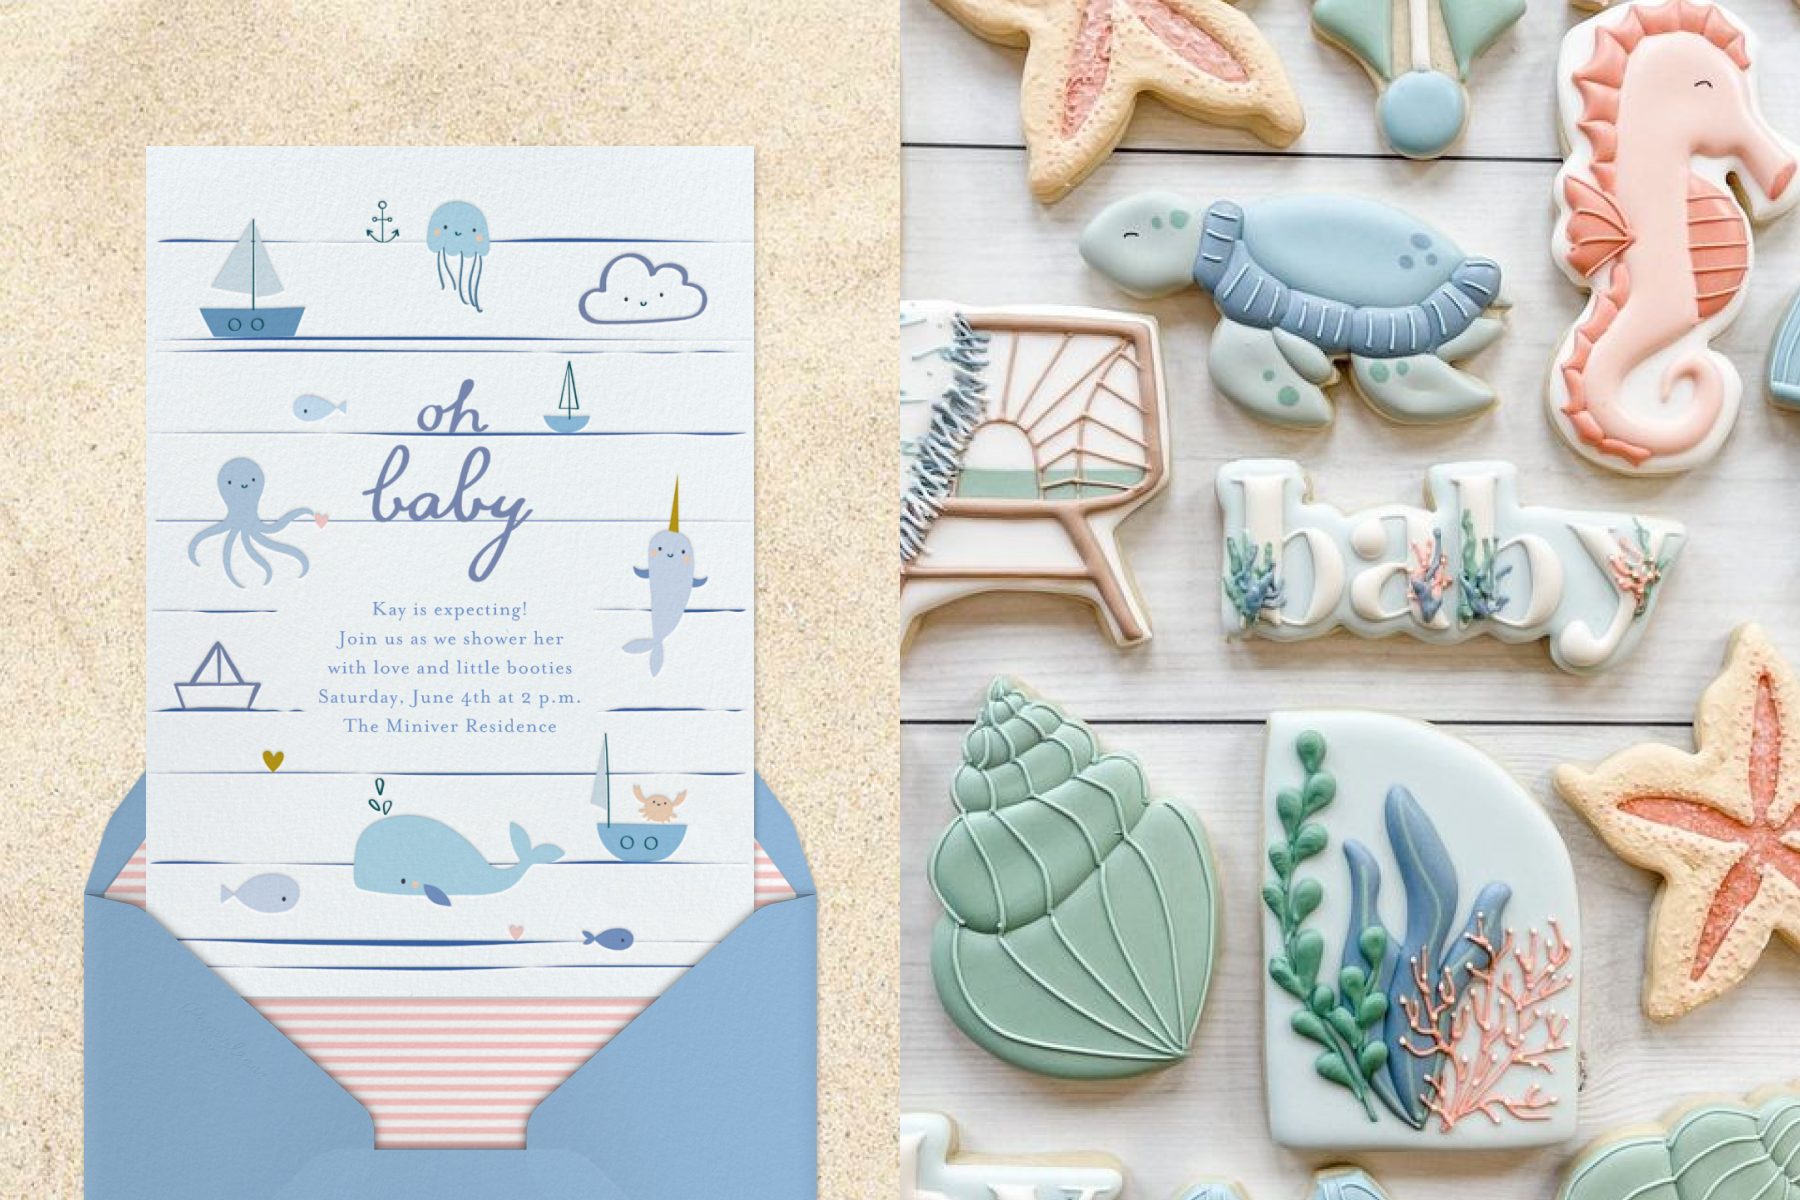 An invitation reads ‘oh baby’ with blue sea creatures and sailboats; sea creature-themed frosted sugar cookies for a baby shower.